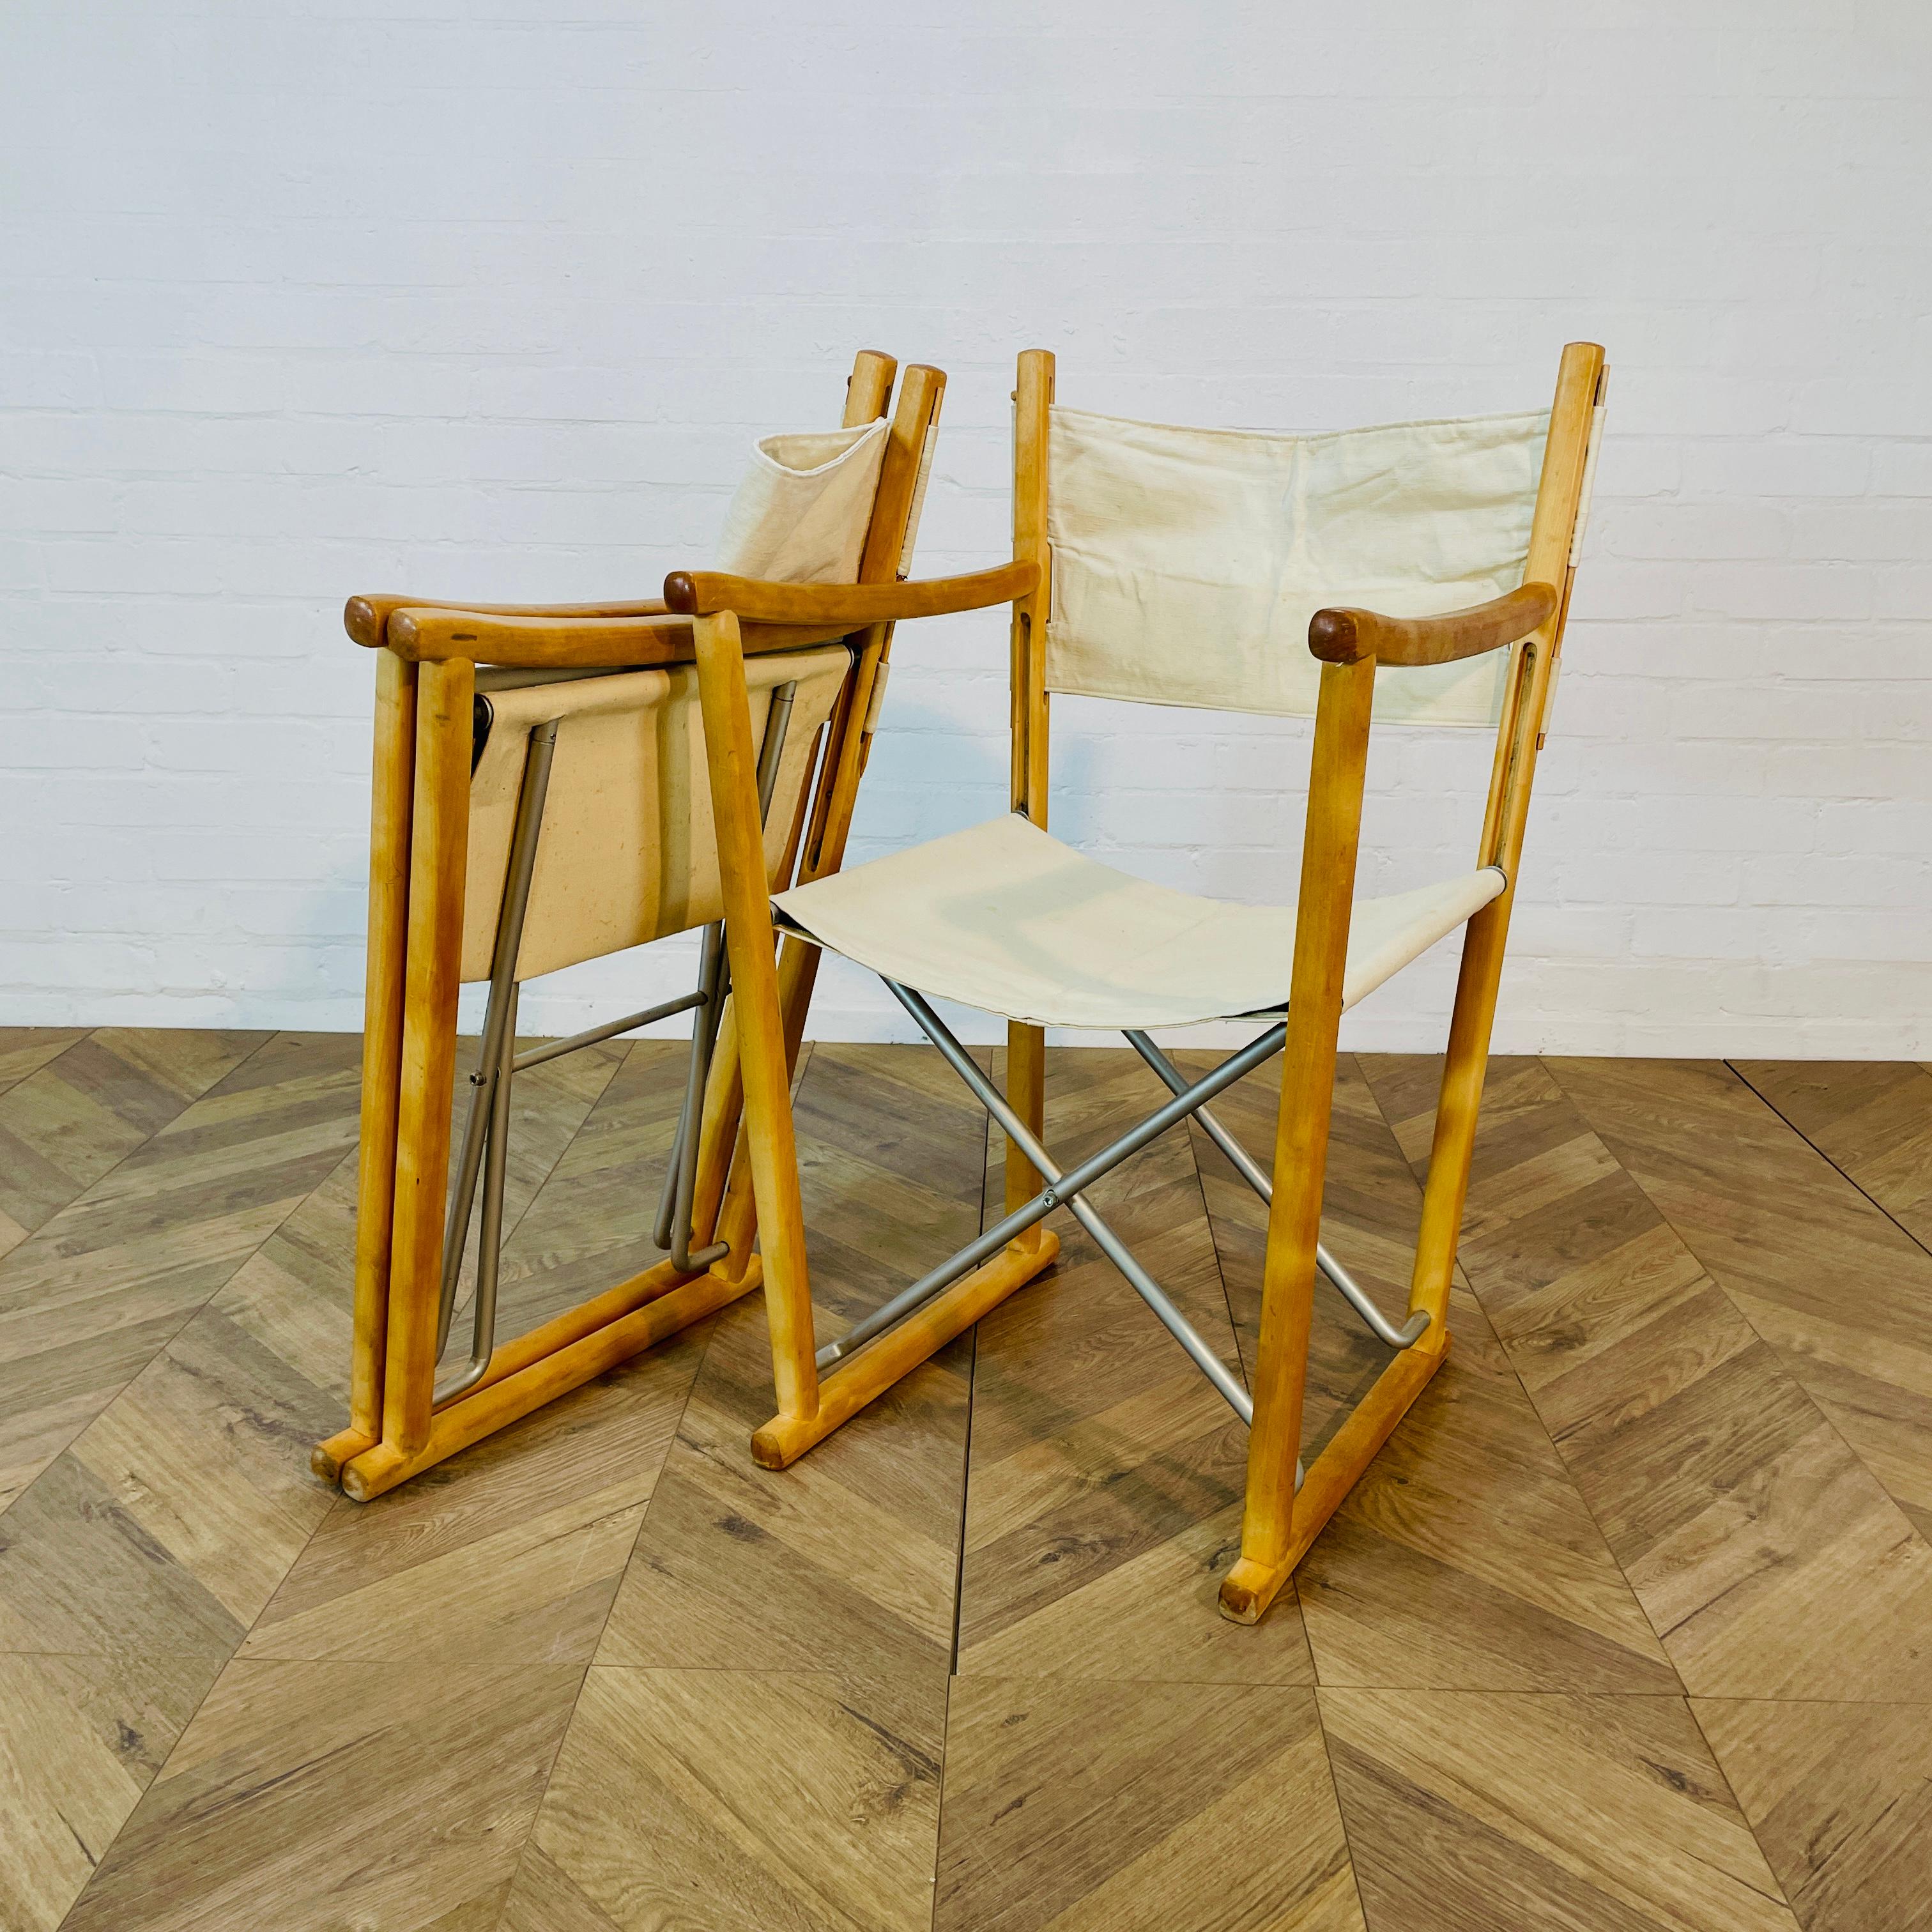 A Set of 4, Late 20th Century Folding Chairs Designed by Peter Karpf for Skagerak / Trip Trap, Denmark.

The chairs are made oak and beige canvas and in good vintage condition.

One of the chairs does show slightly more wear to frame and seat than